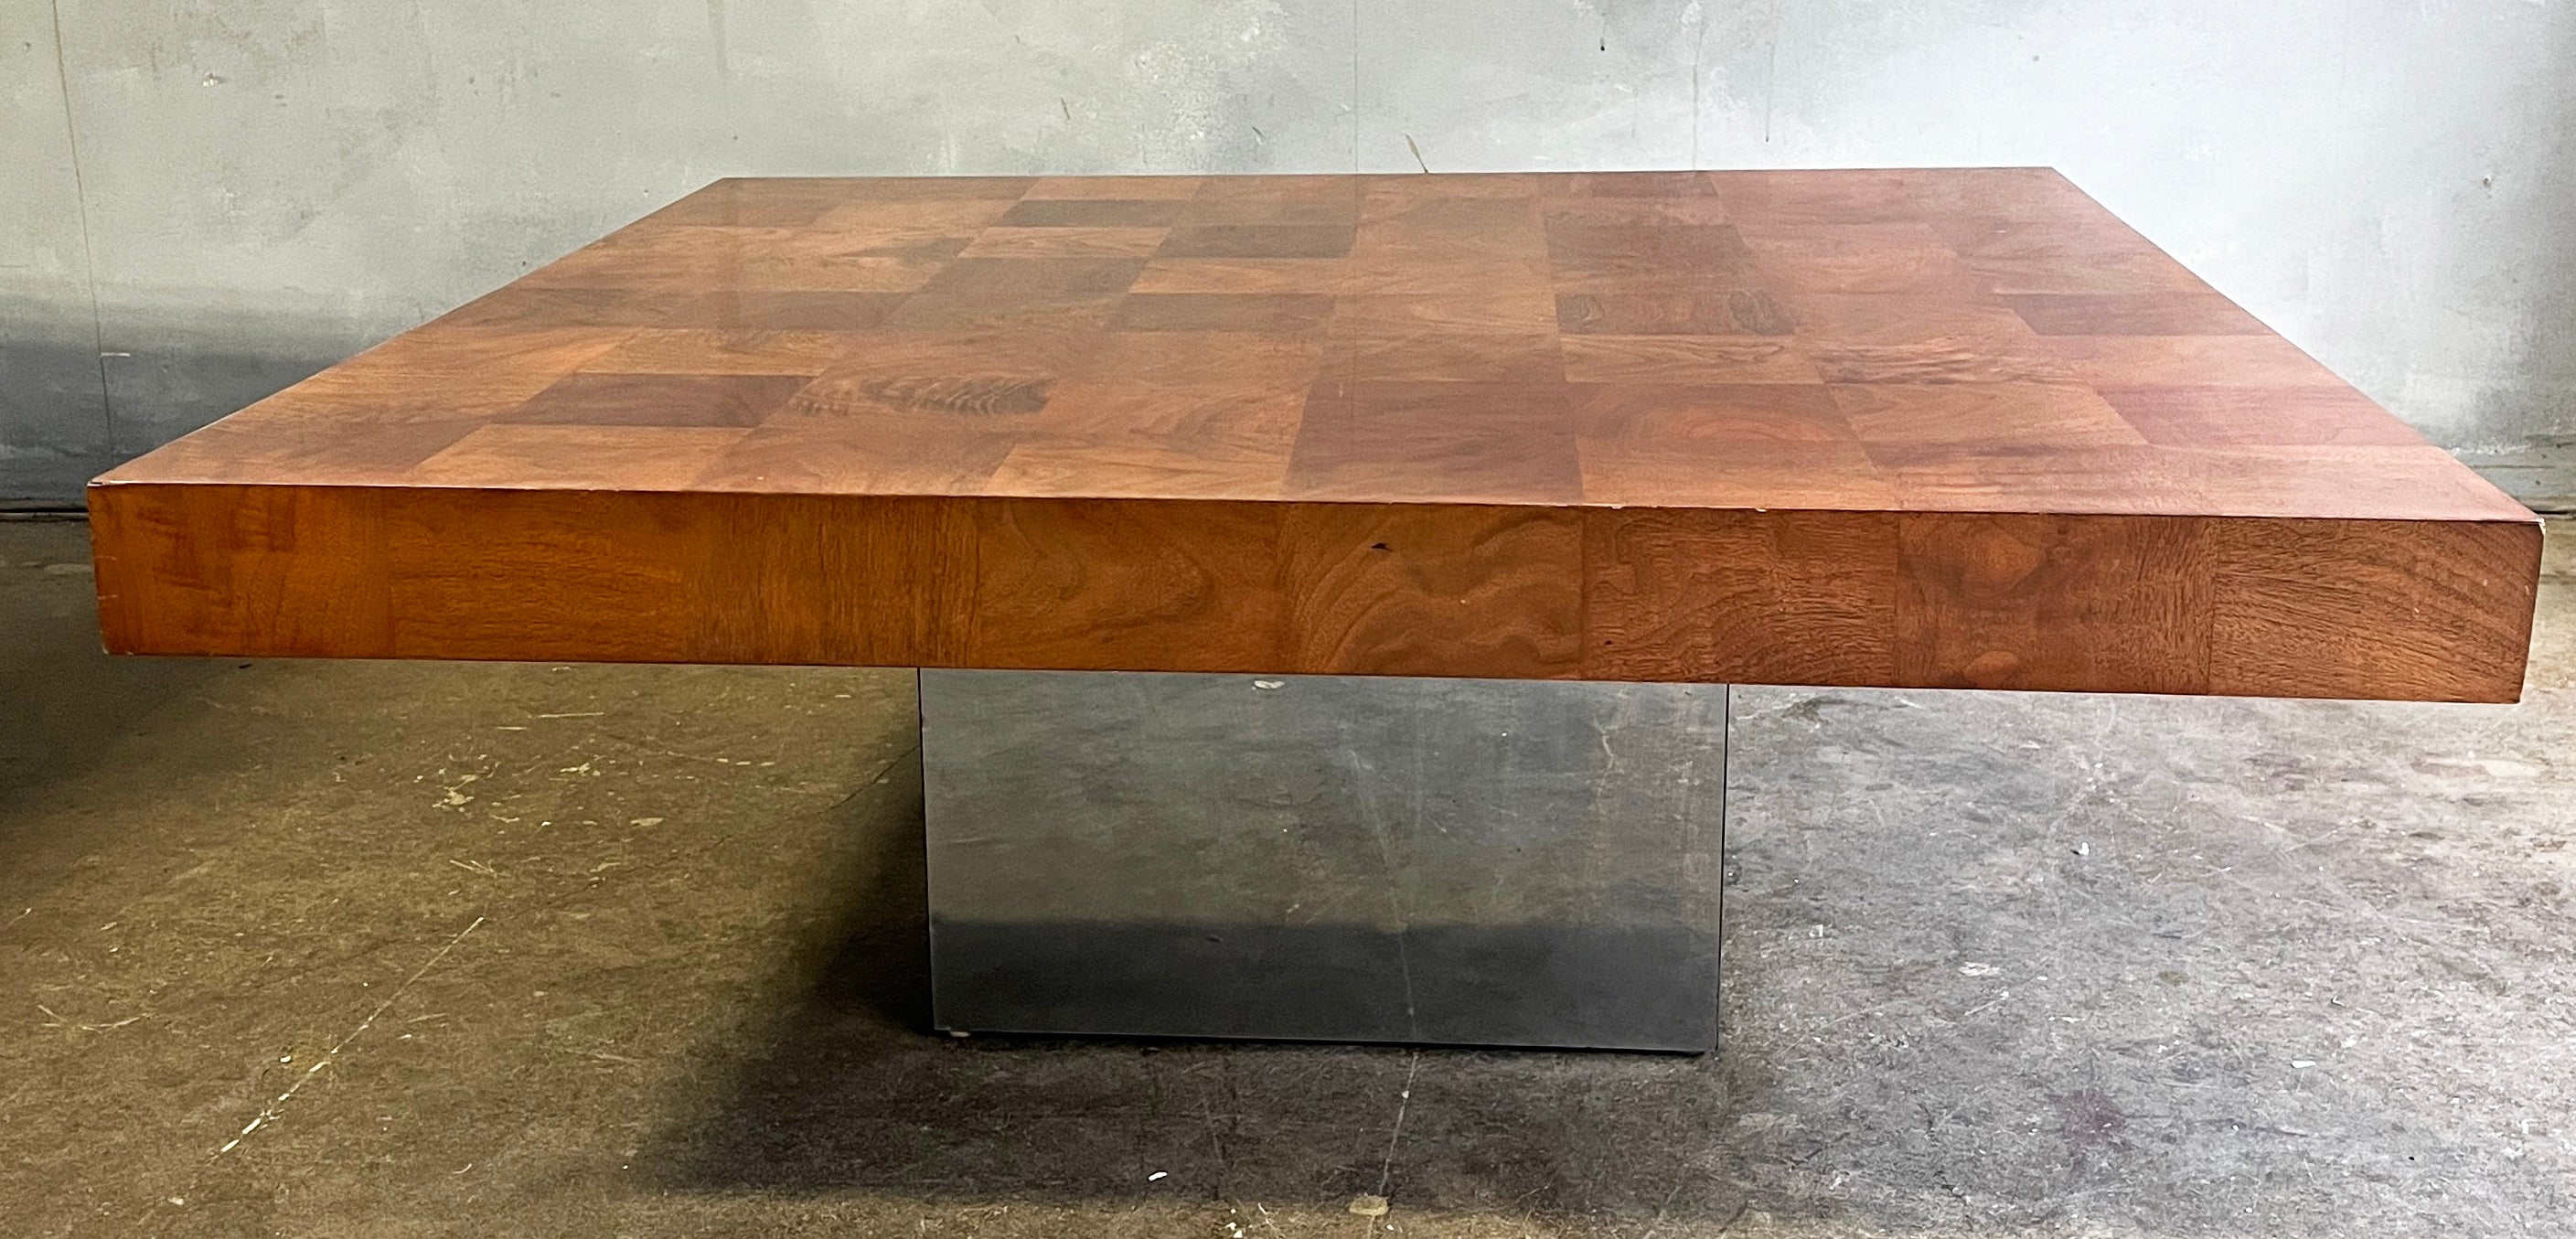 Large and beautiful 40'' olive wood and chromed base coffee table by Milo Baughman. Inlay burl wood / patchwork wood top.
Labeled- Thayer Coggin by Milo Baughman on the underside. Gloss finish

Made in the 60's with the same style as Paul Evans